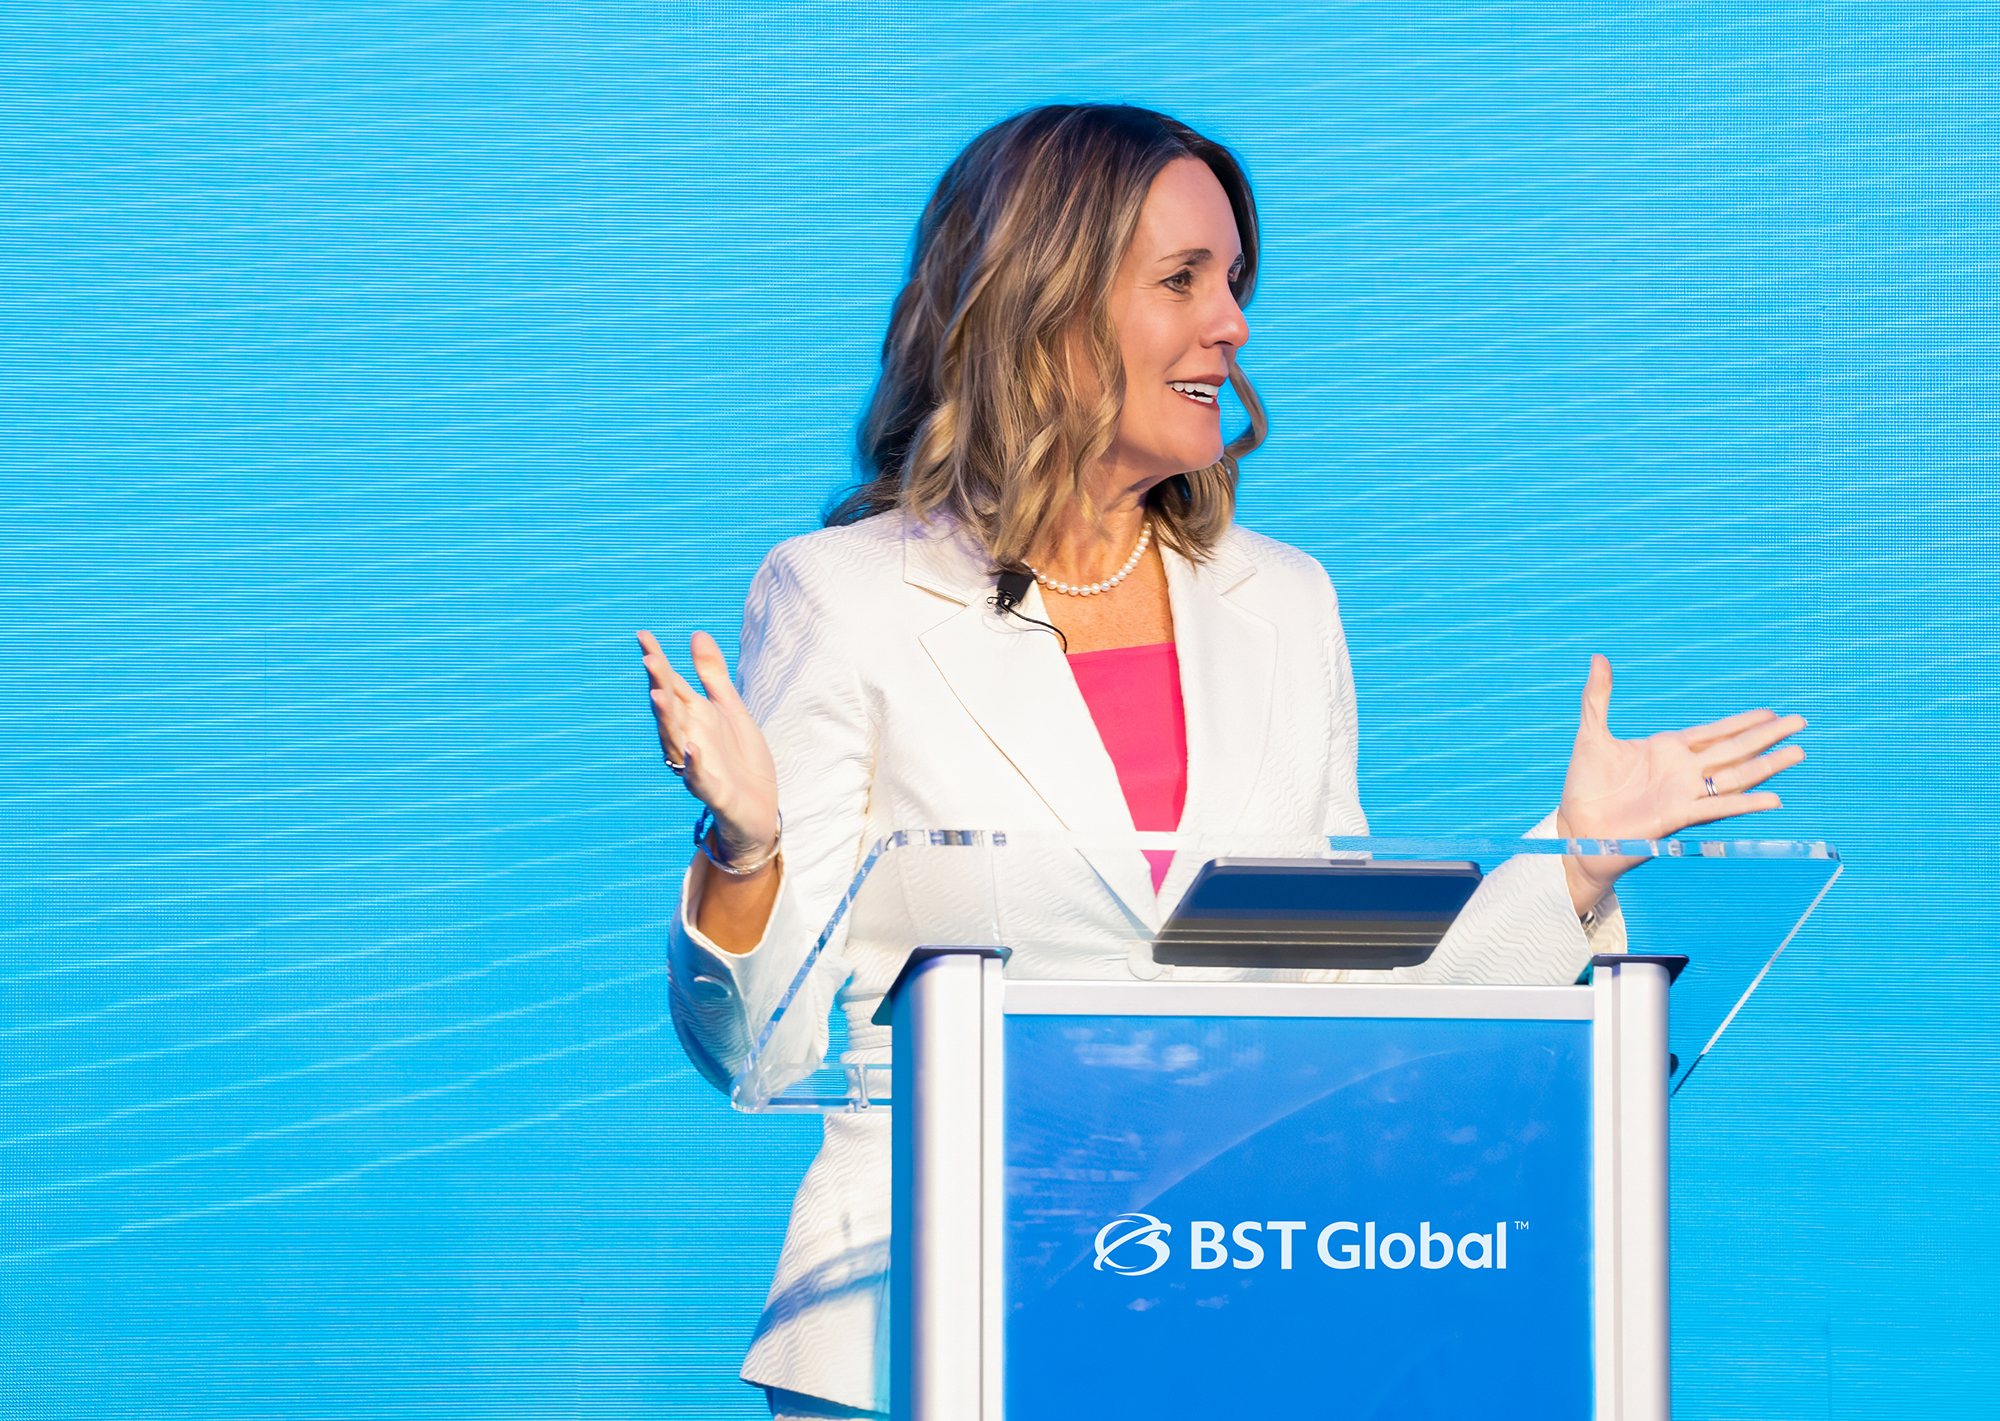 BST Global Appoints Eileen M. Canady as Chief Marketing Officer to Spearhead Growth & Brand Innovation in the AEC Industry